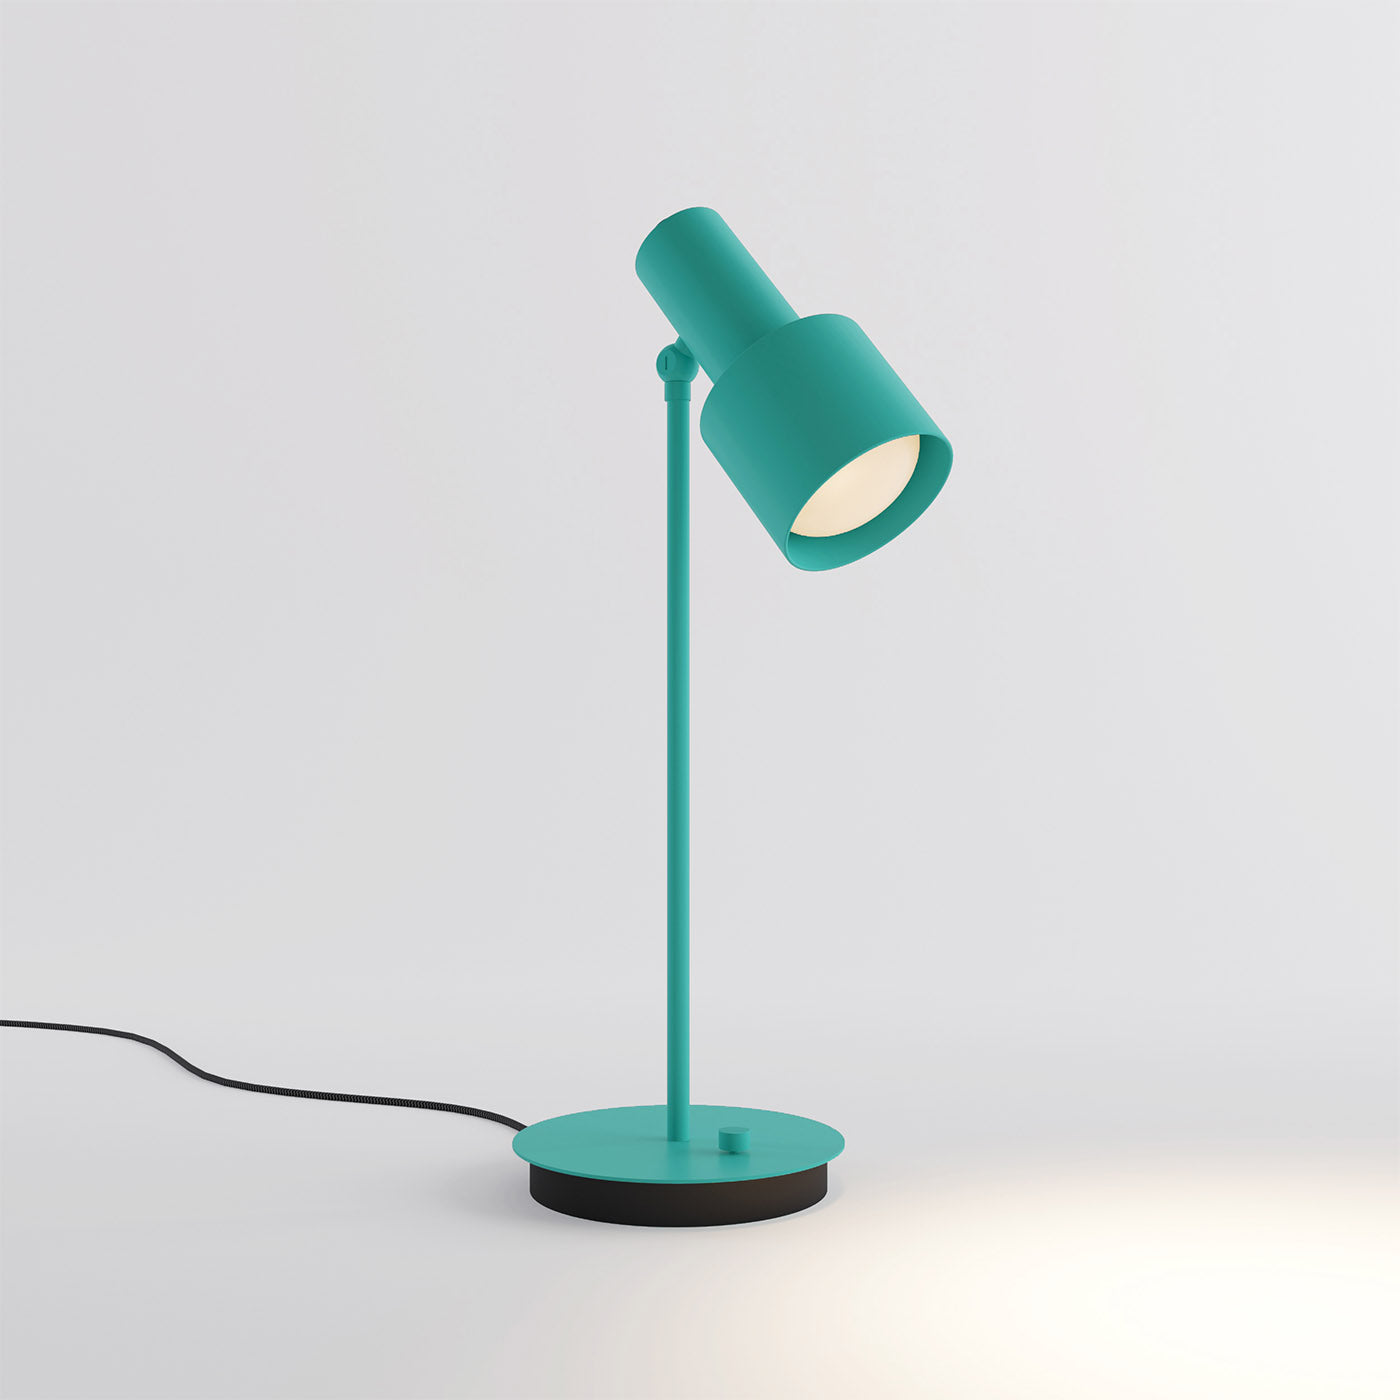 Light Gallery Luxury GP Light-Green Table Lamp by Marco Police - Alternative view 2